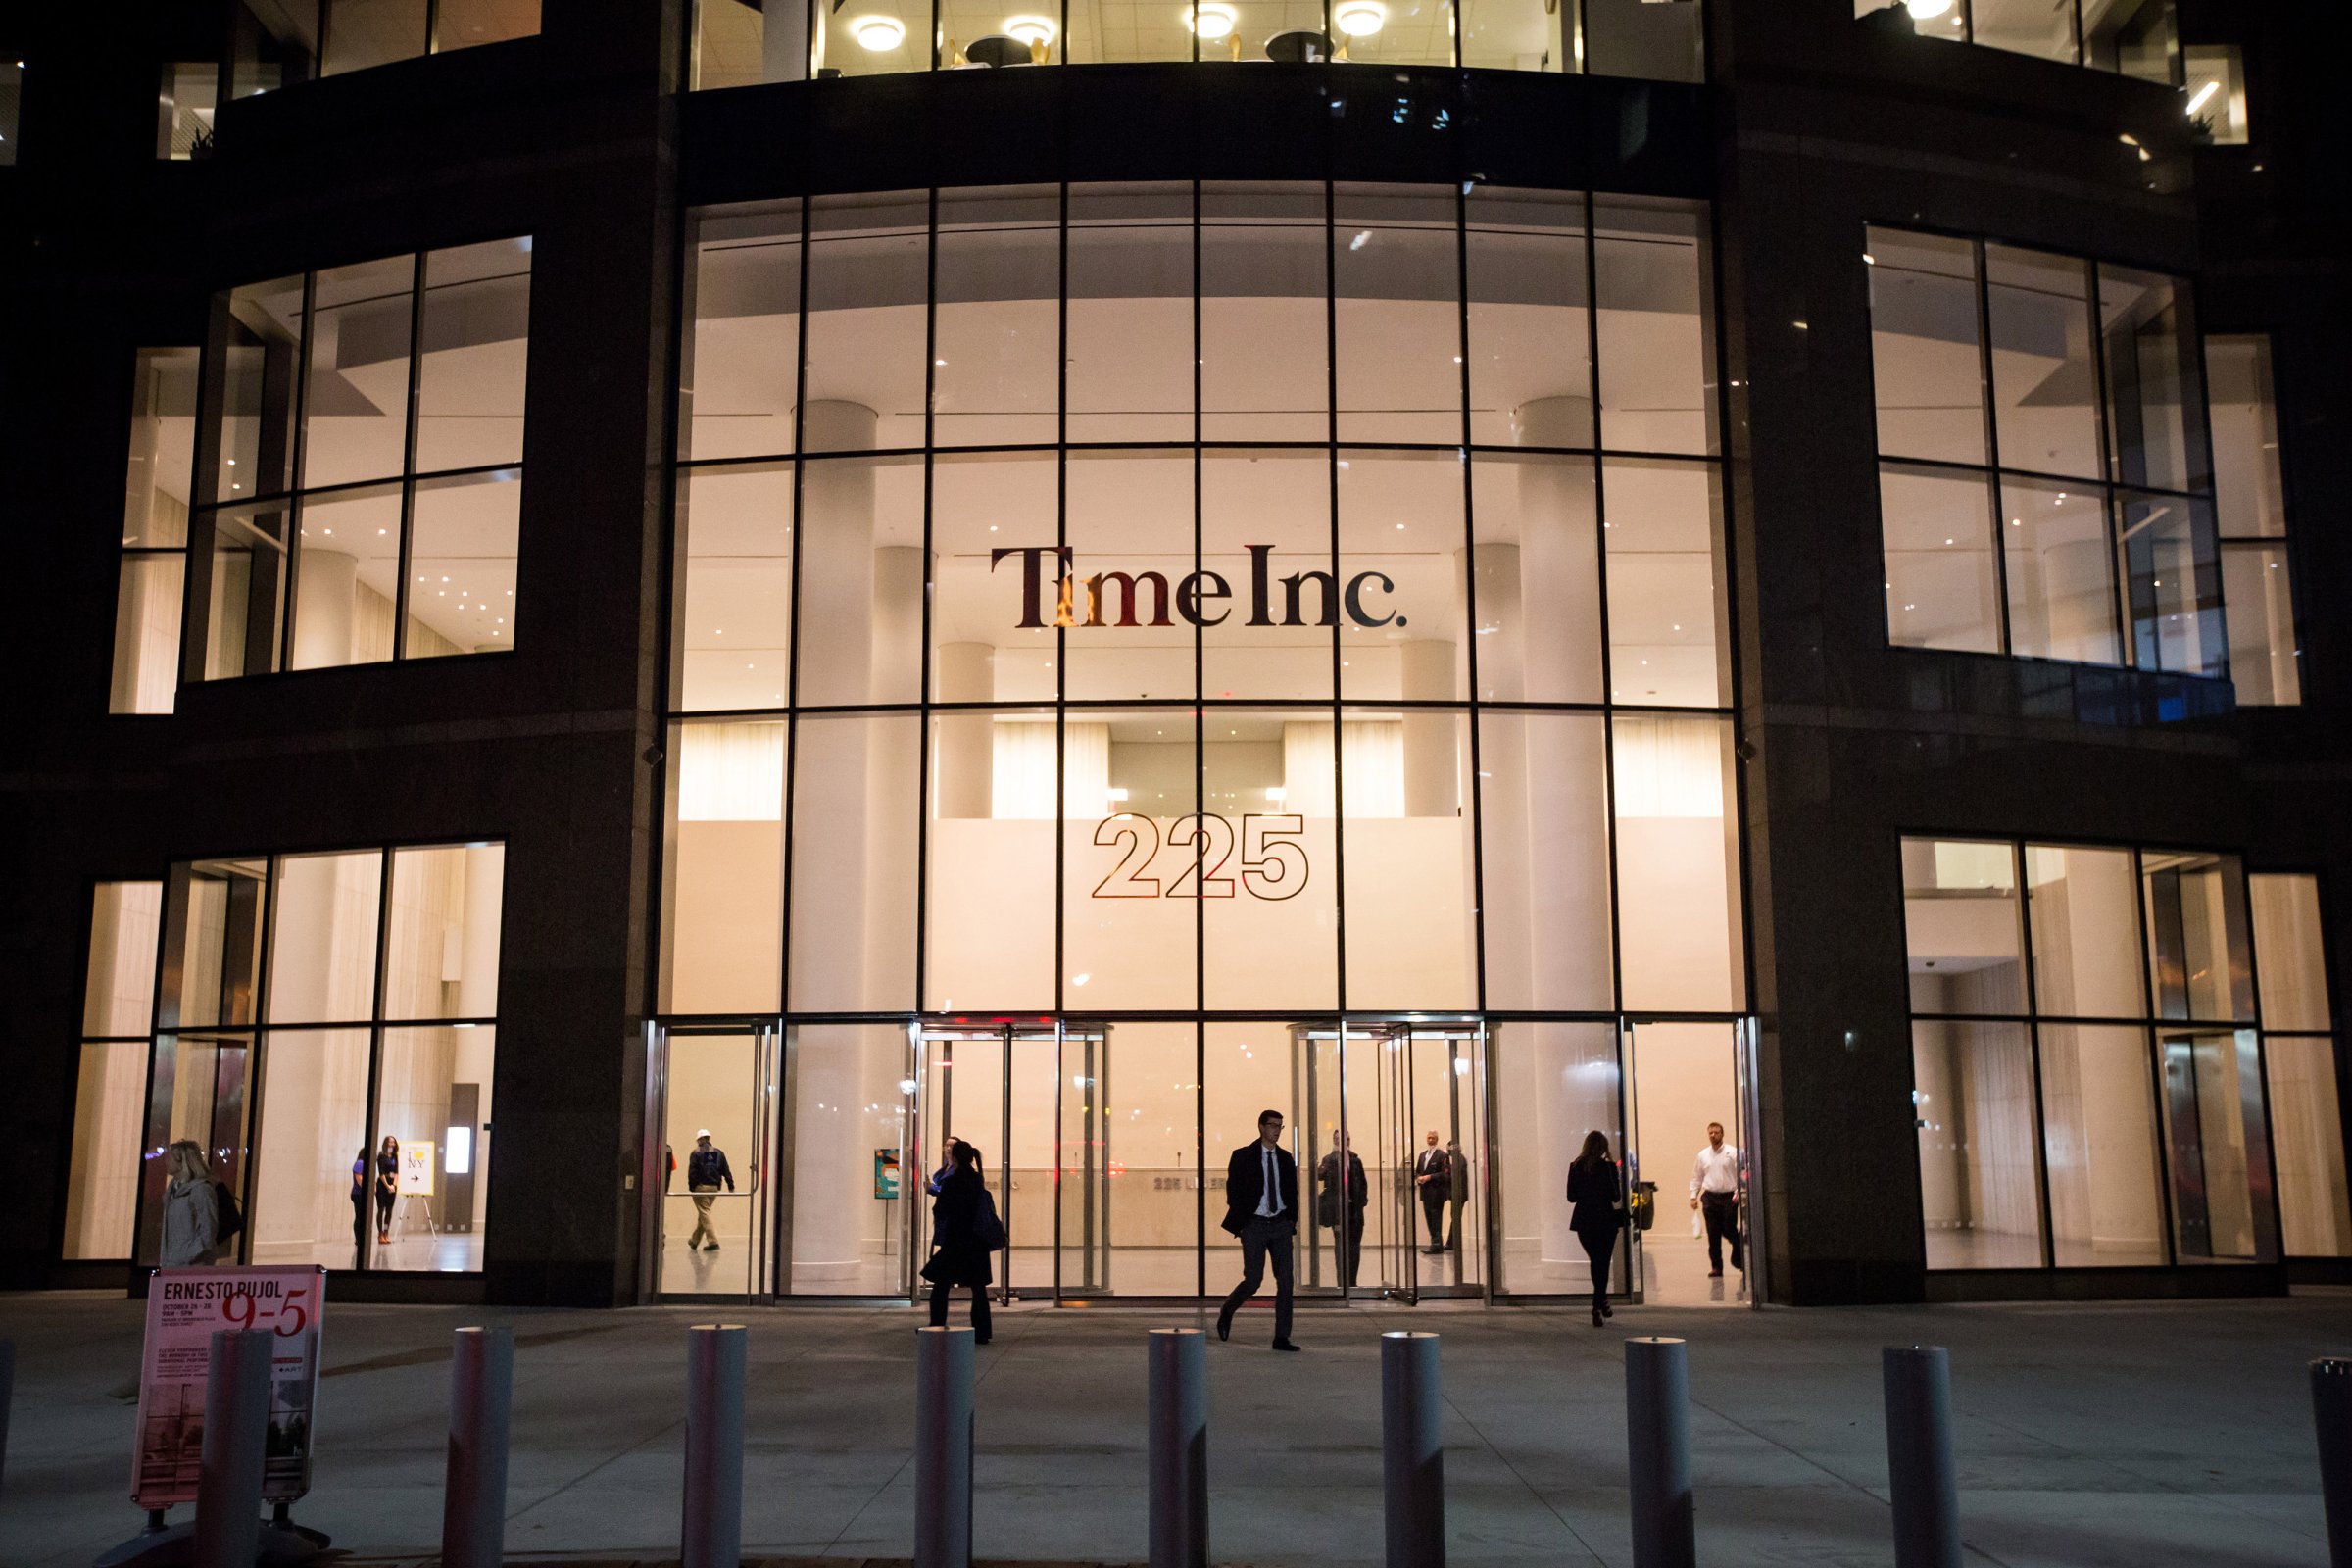 Pedestrians walk past the new headquarters of Time Inc. in New York, N.Y, on Tuesday, Oct. 27, 2015.